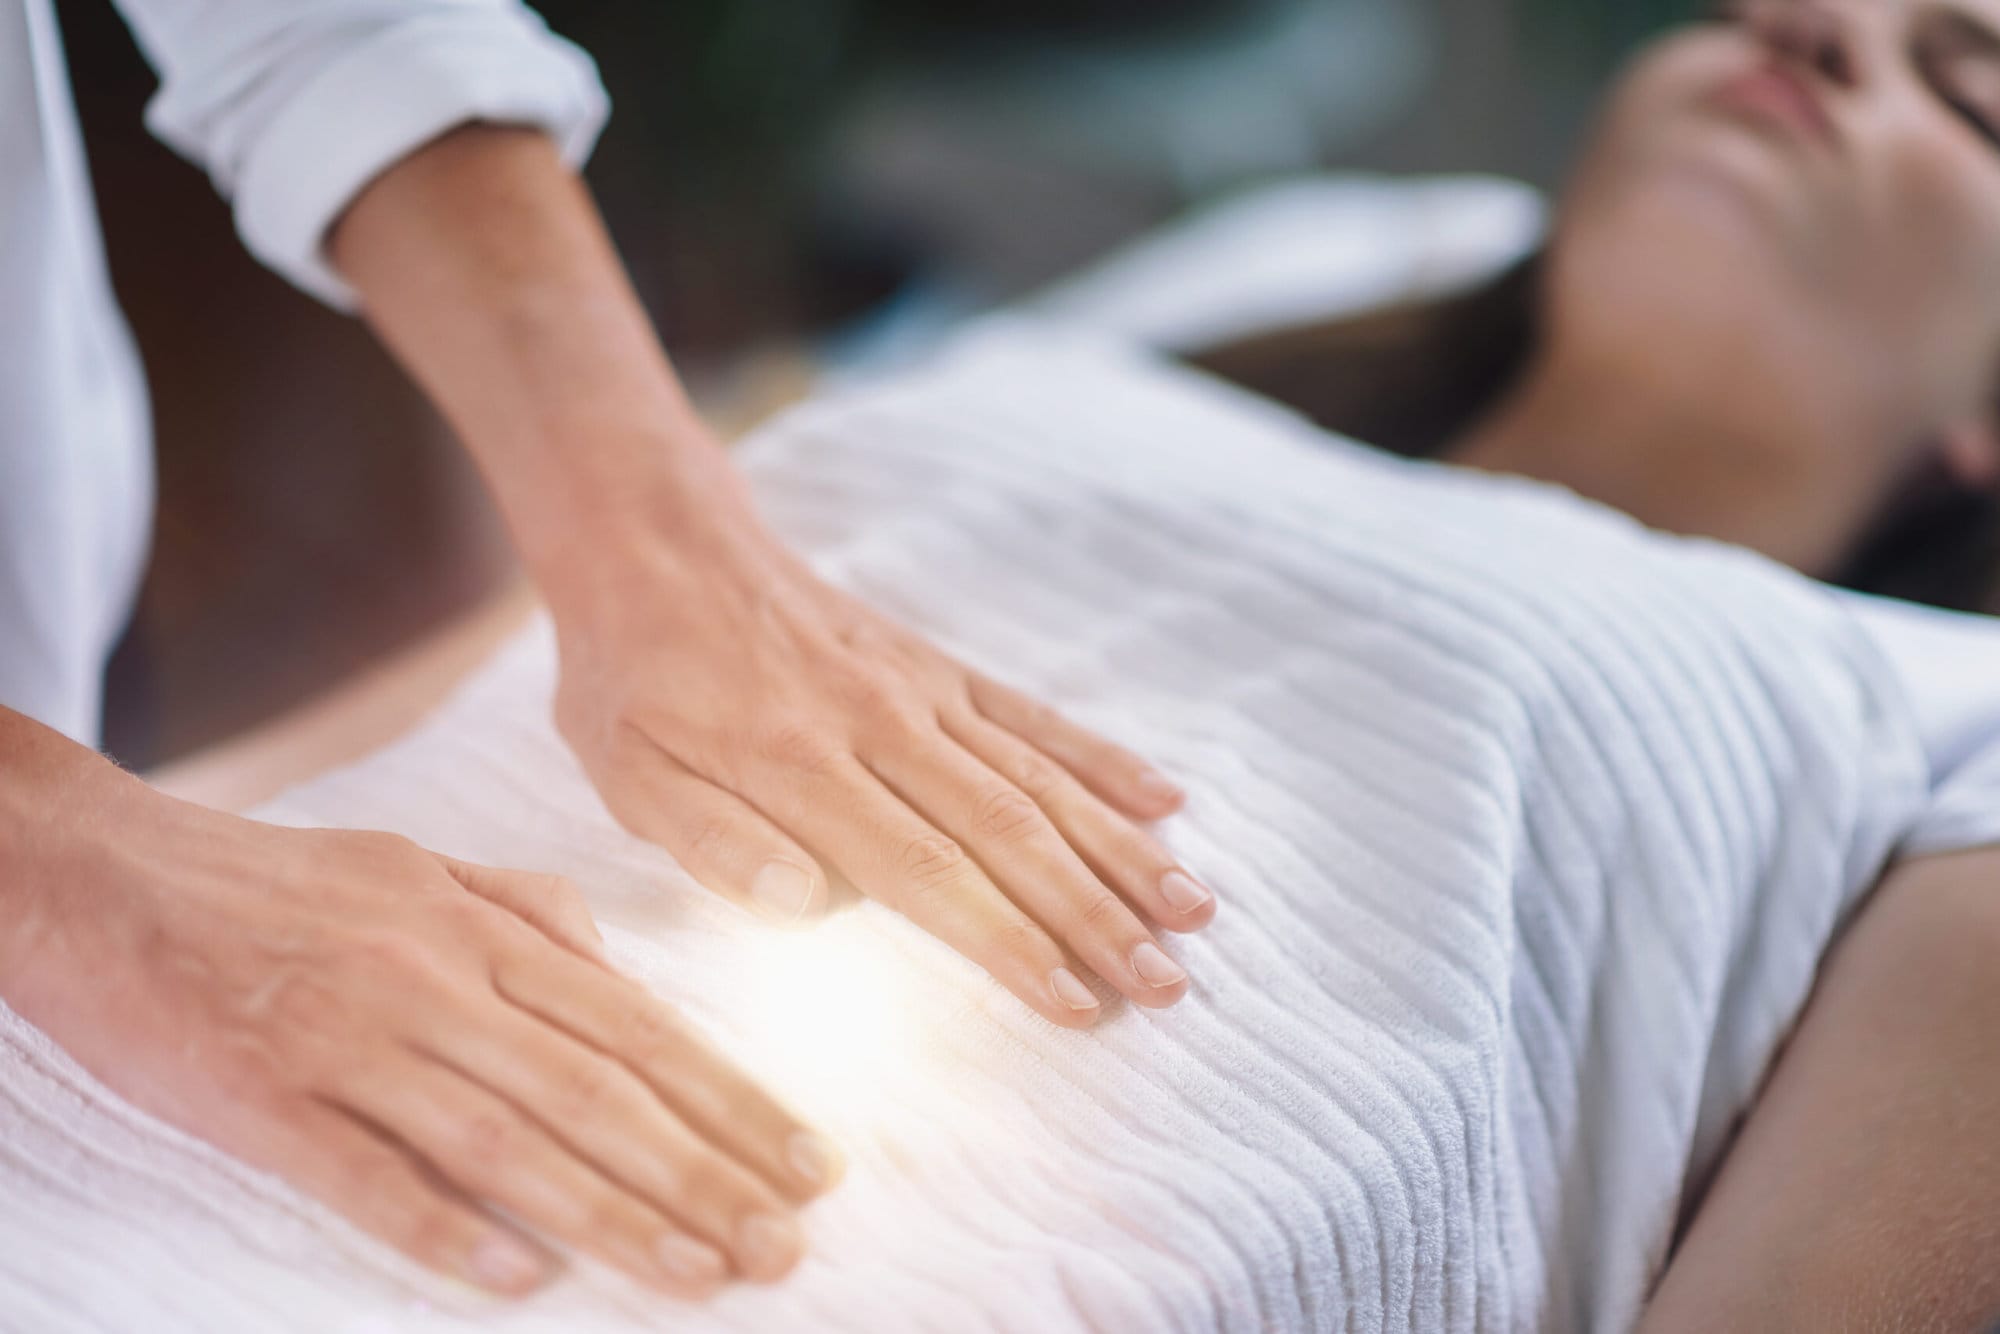 Female therapist performing Reiki therapy treatment holding hands over woman's stomach. Alternative therapy concept of stress reduction and relaxation.